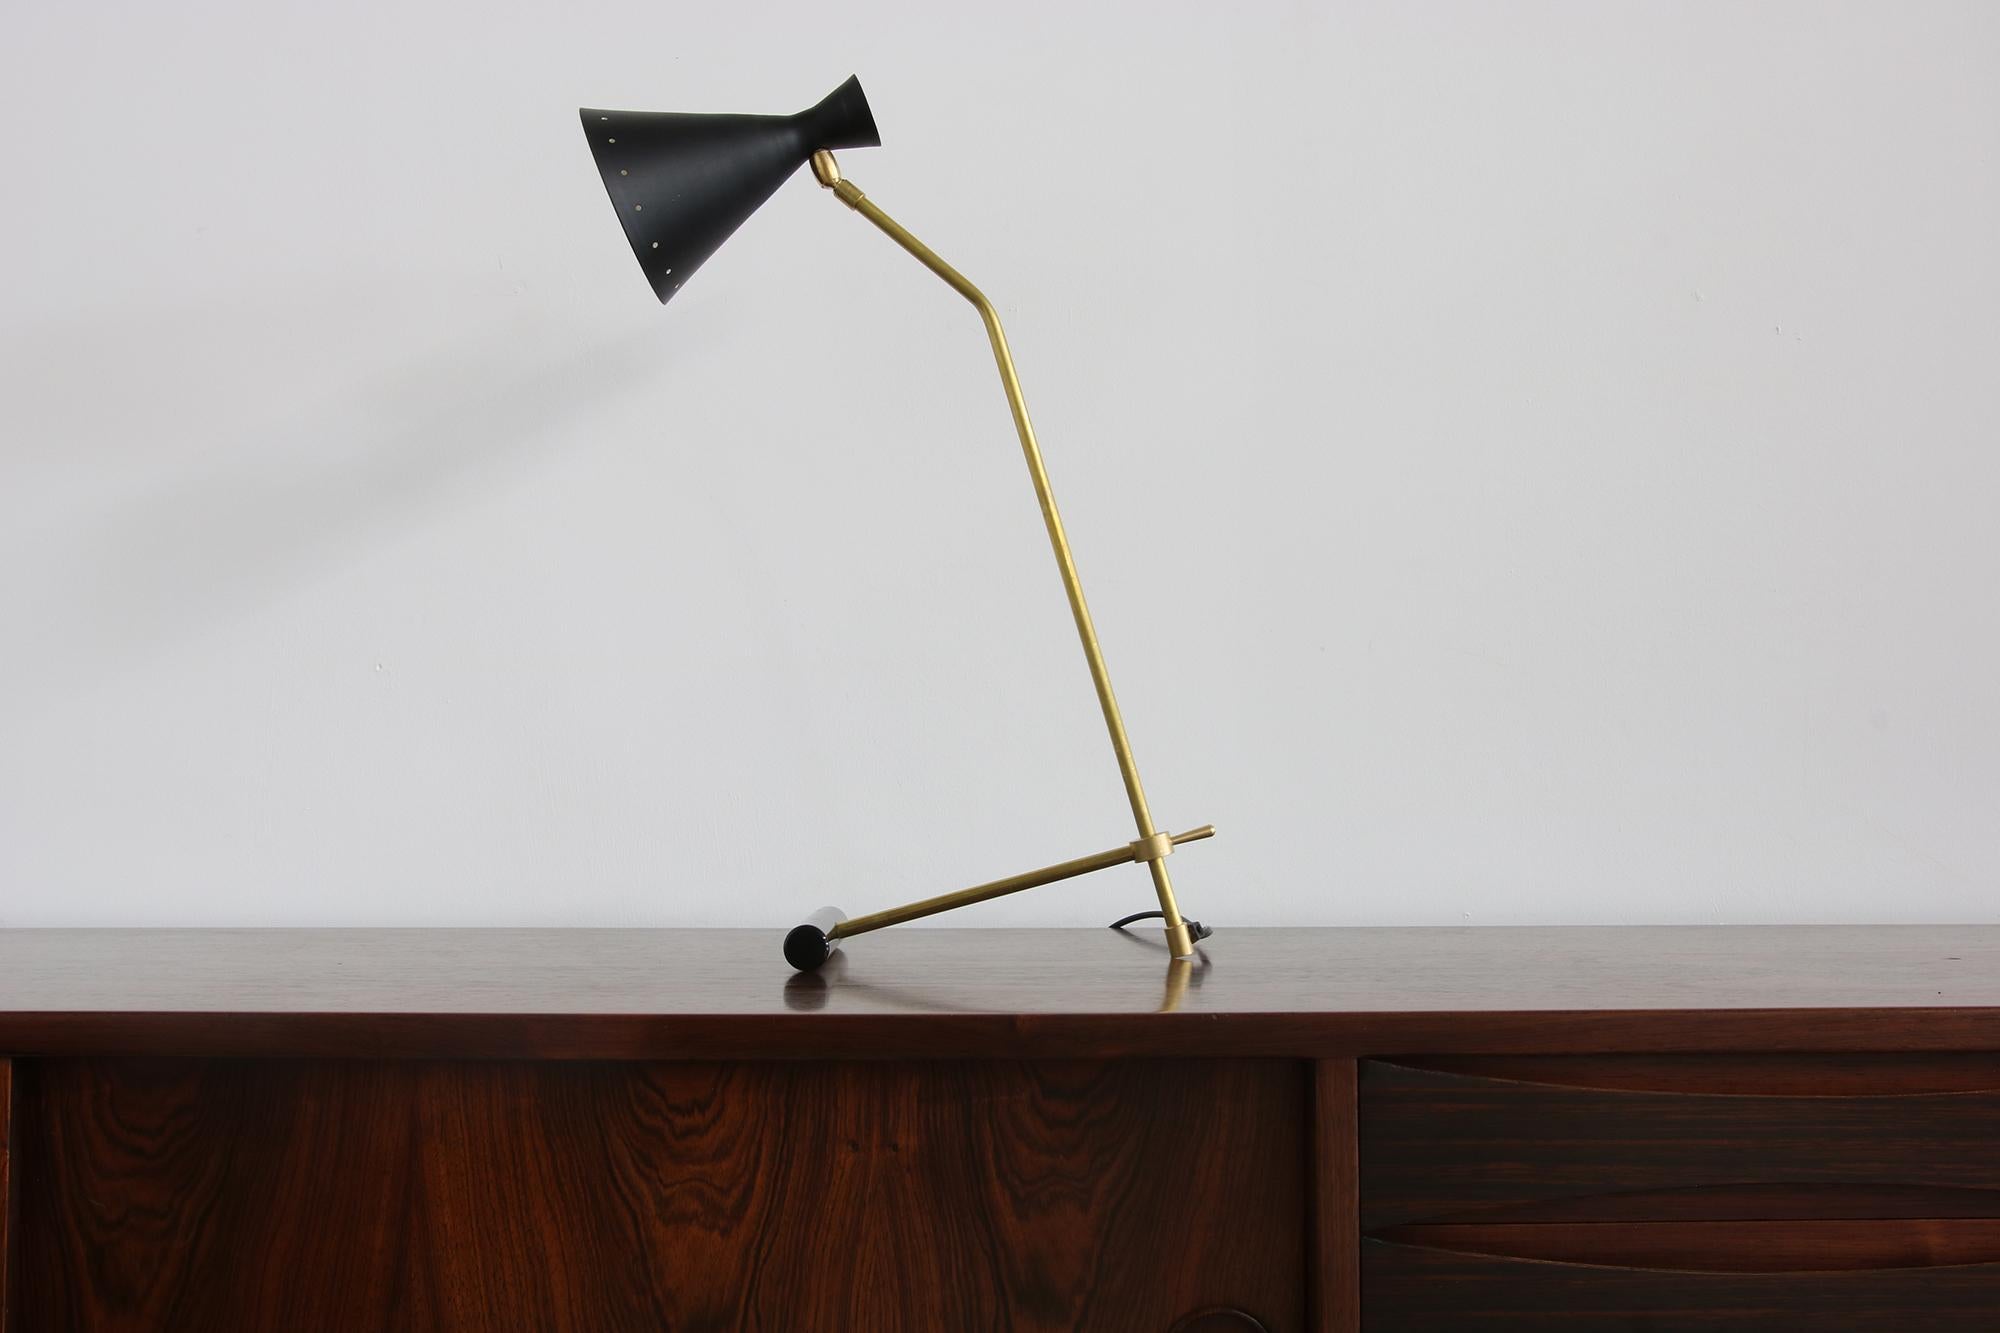 Beautiful modern Italian table lamp in midcentury style.
Works in the US and Asia as well, of course in Europe also.
Adjustable lampshade, up to 60W.

 